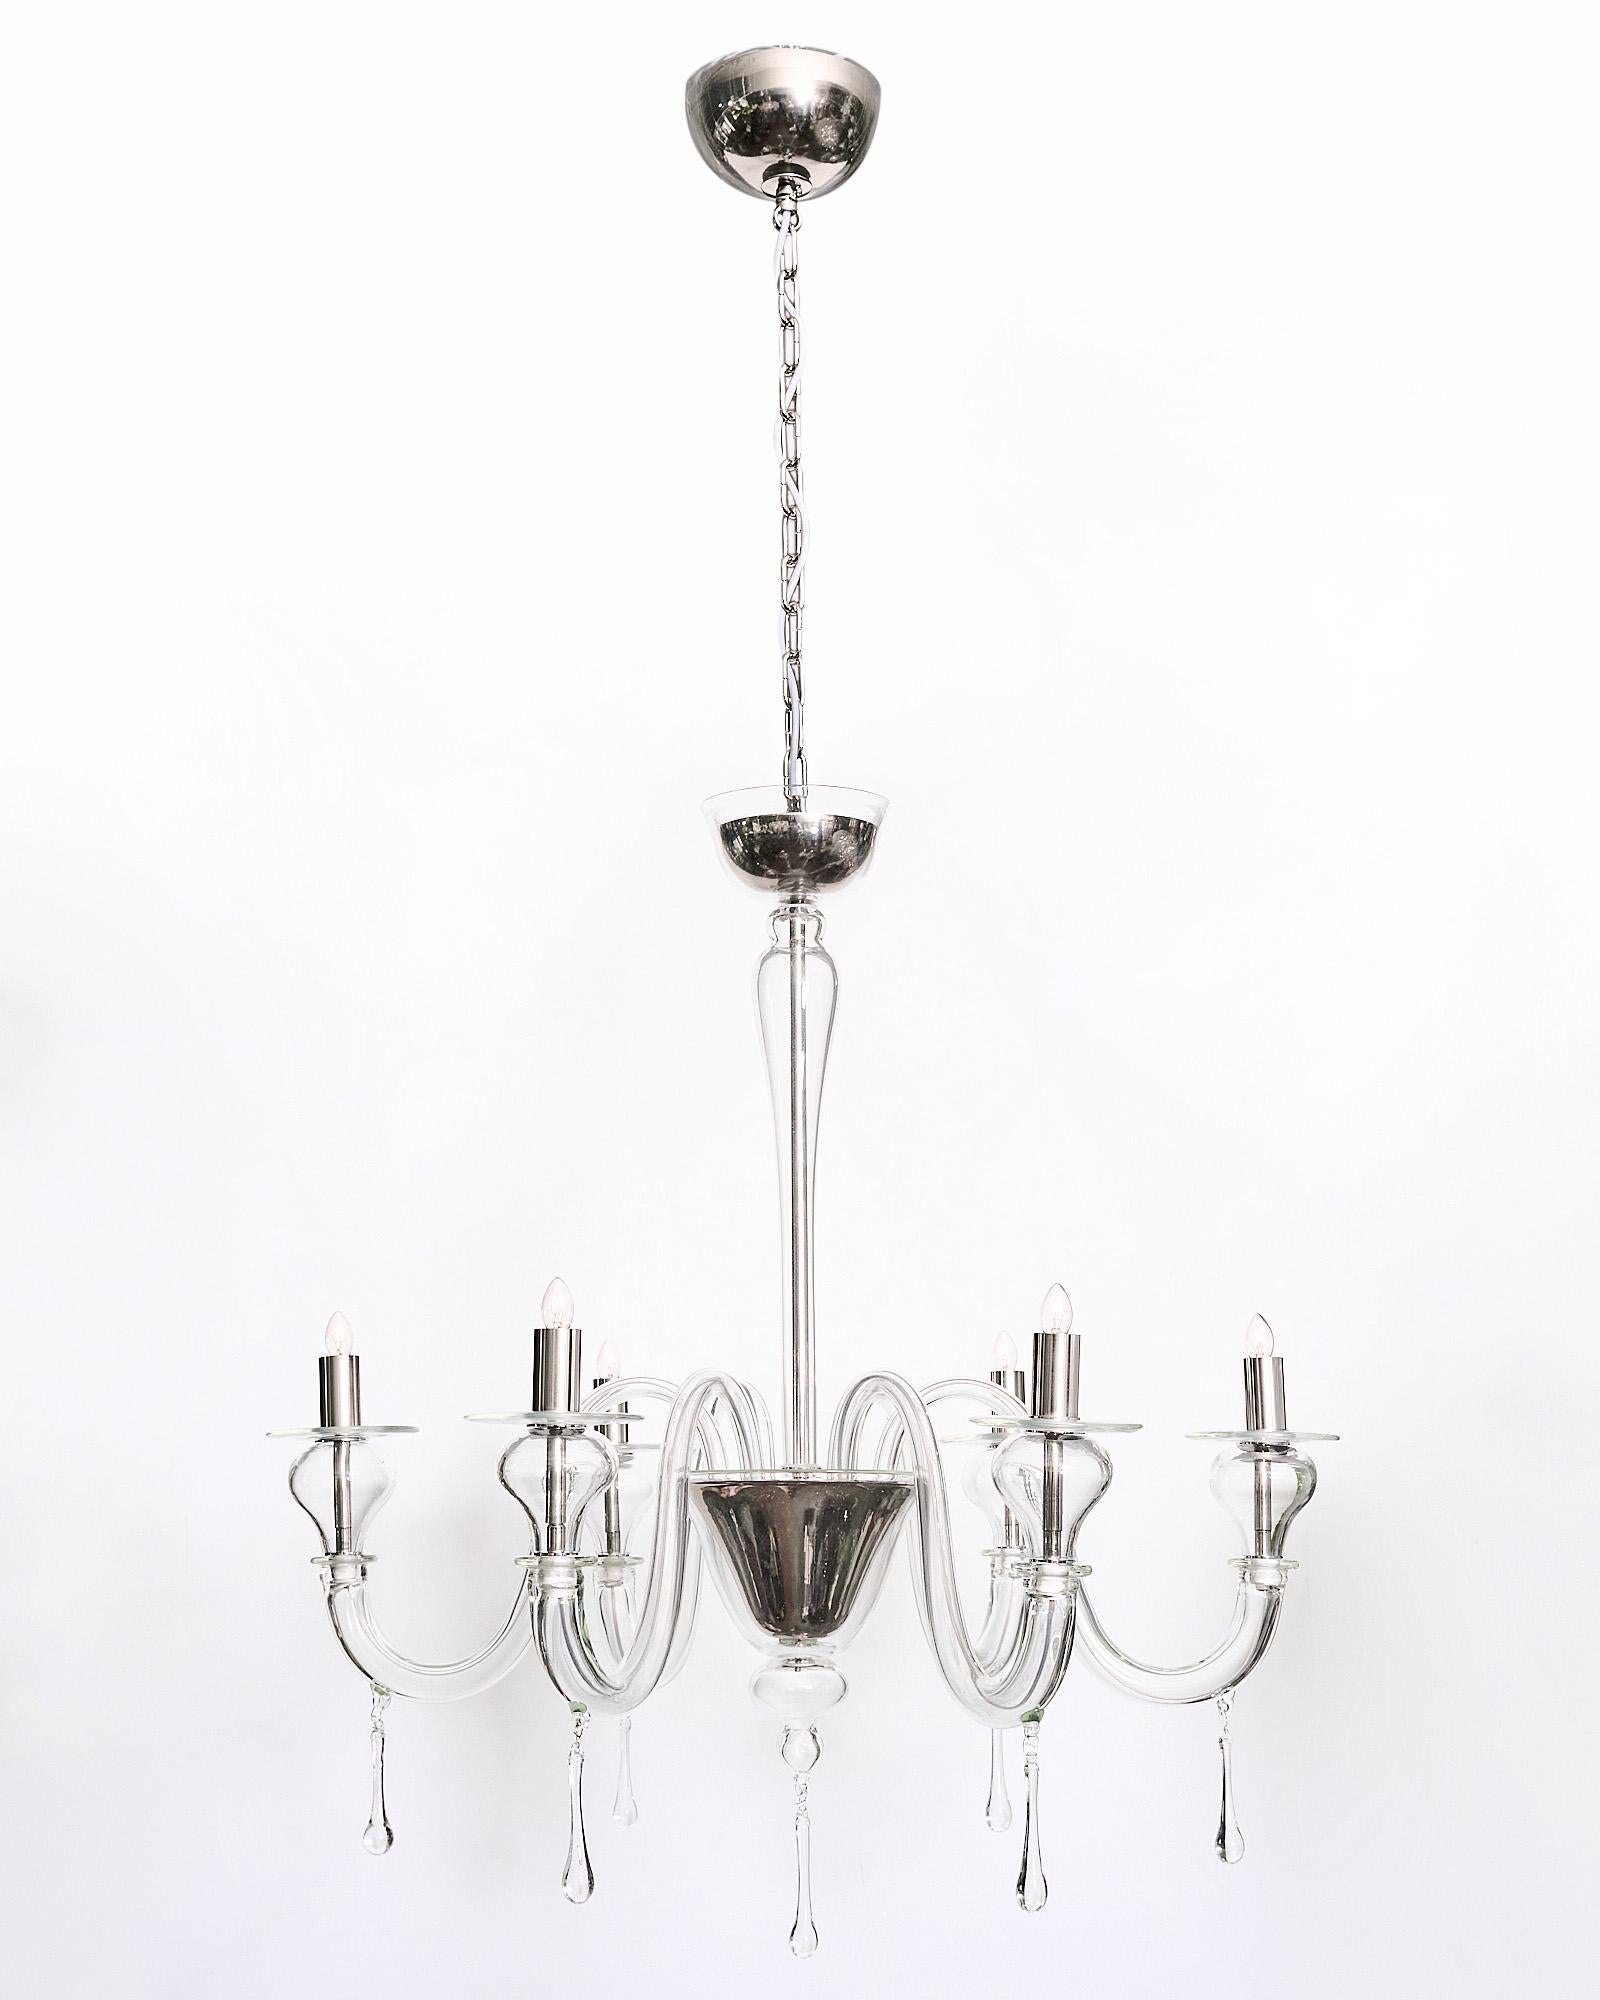 Elegant “Cristallo Puro” chandelier made of hand-blown Murano glass. It has six branches with pendants, blown bobêches. The cups and candelabras are chromed; giving this chandelier a more modern look, while the graceful movement on the branches